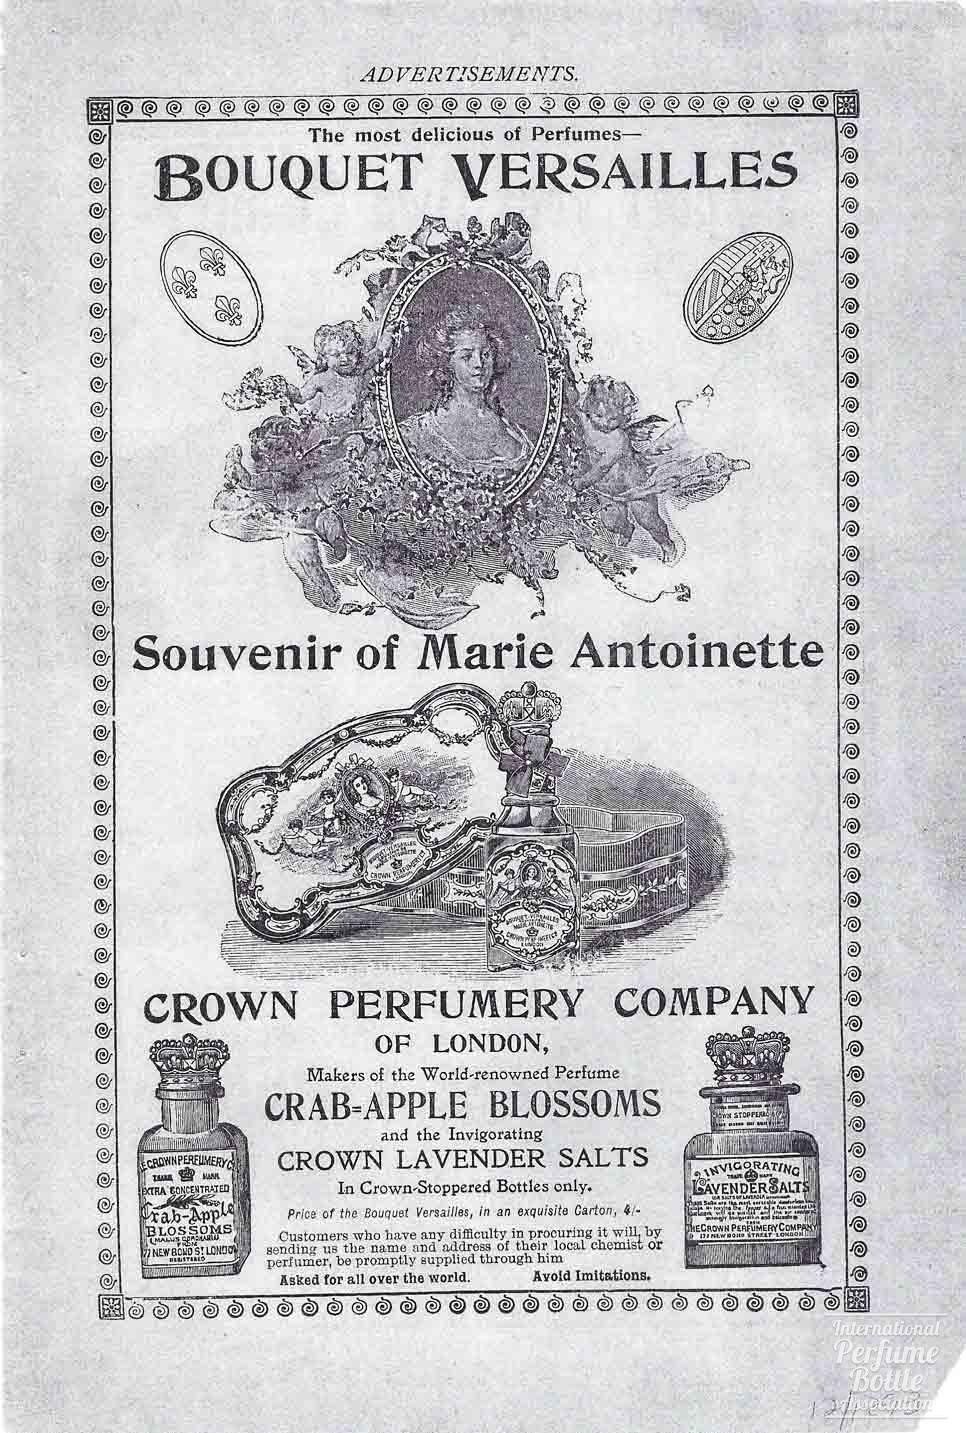 "Bouquet Versailles" by Crown Perfumery Co. Advertisement - 1898